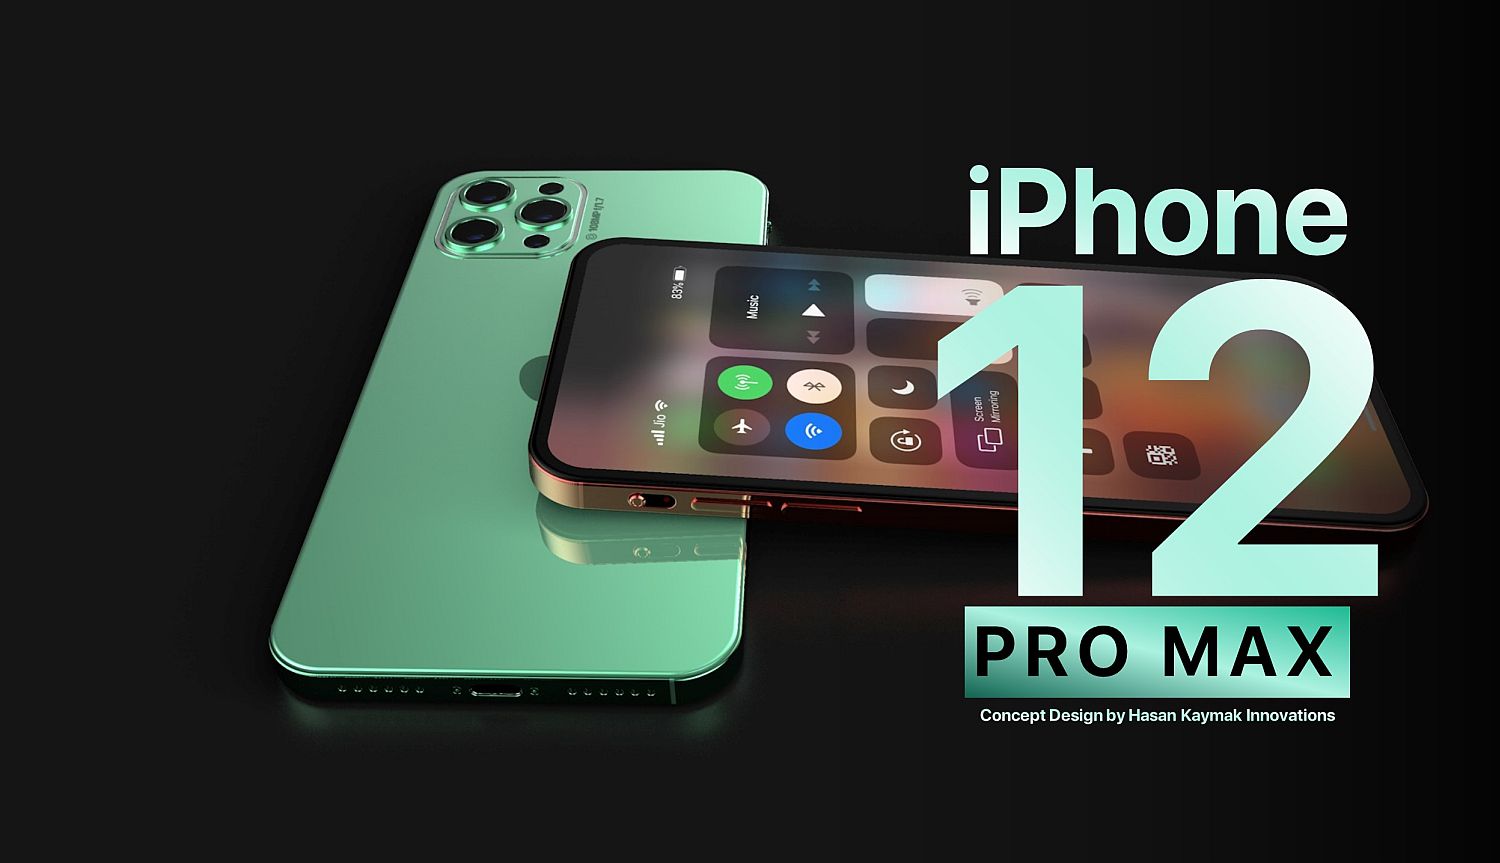 Iphone 12 Pro Max Opts For 108 Megapixel Camera In Fresh Renders